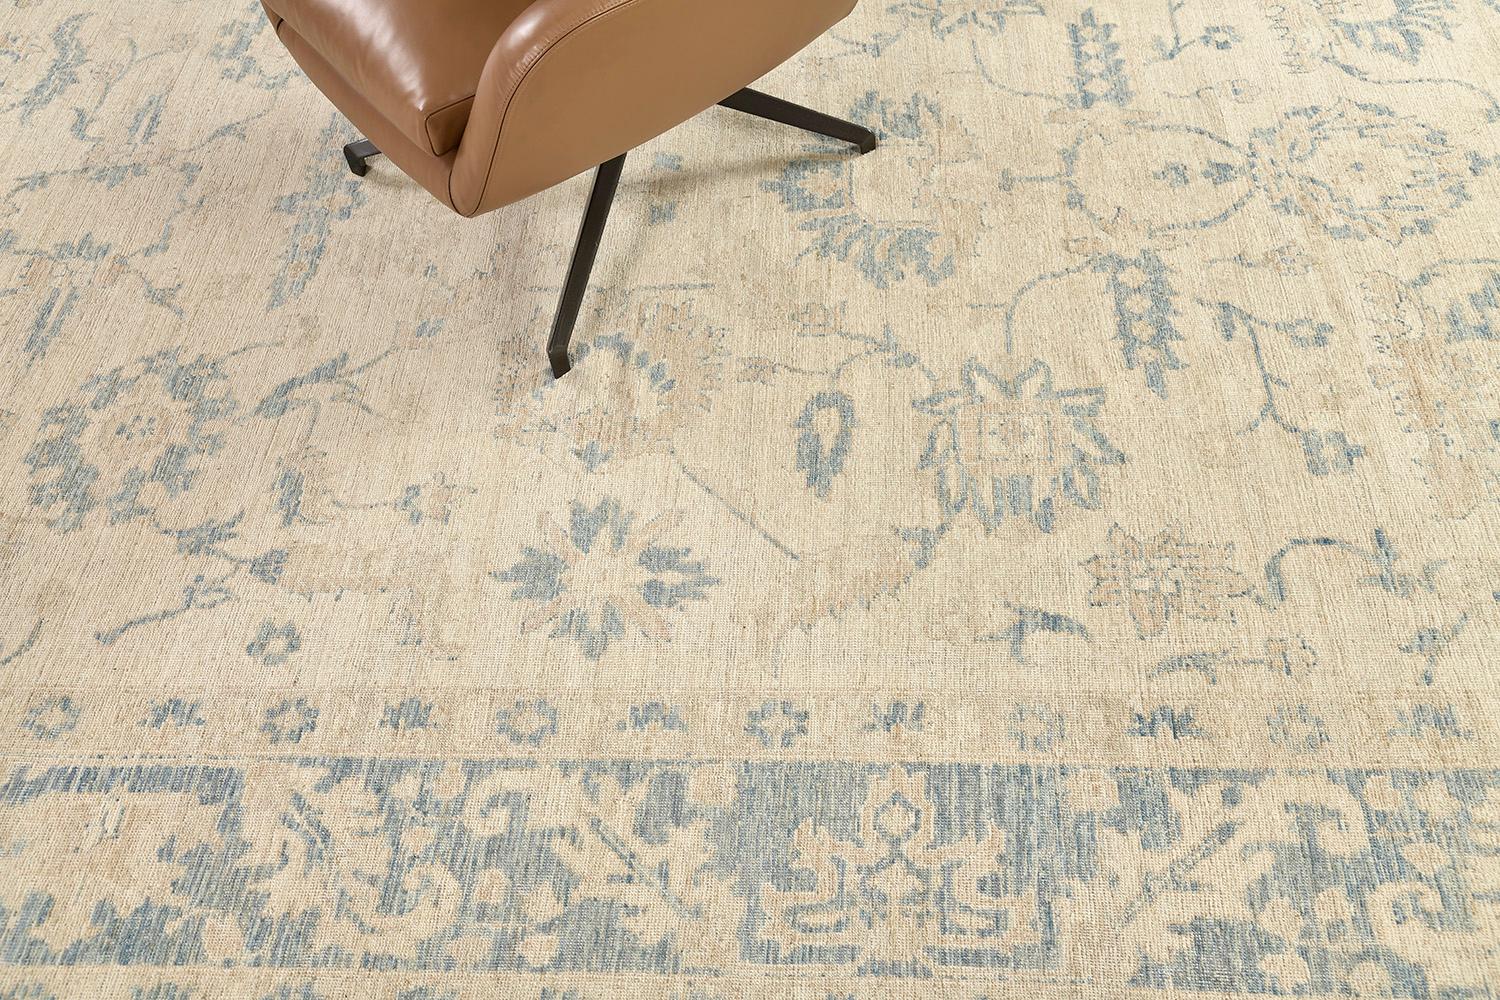 A simplicity through its beauty of a hand-spun wool revival of Oushak rug from our collections. From the sage gray of the field to the outlines of gloomy blue motifs and scrolls. It creates a soulful balance of everything from modern decor to